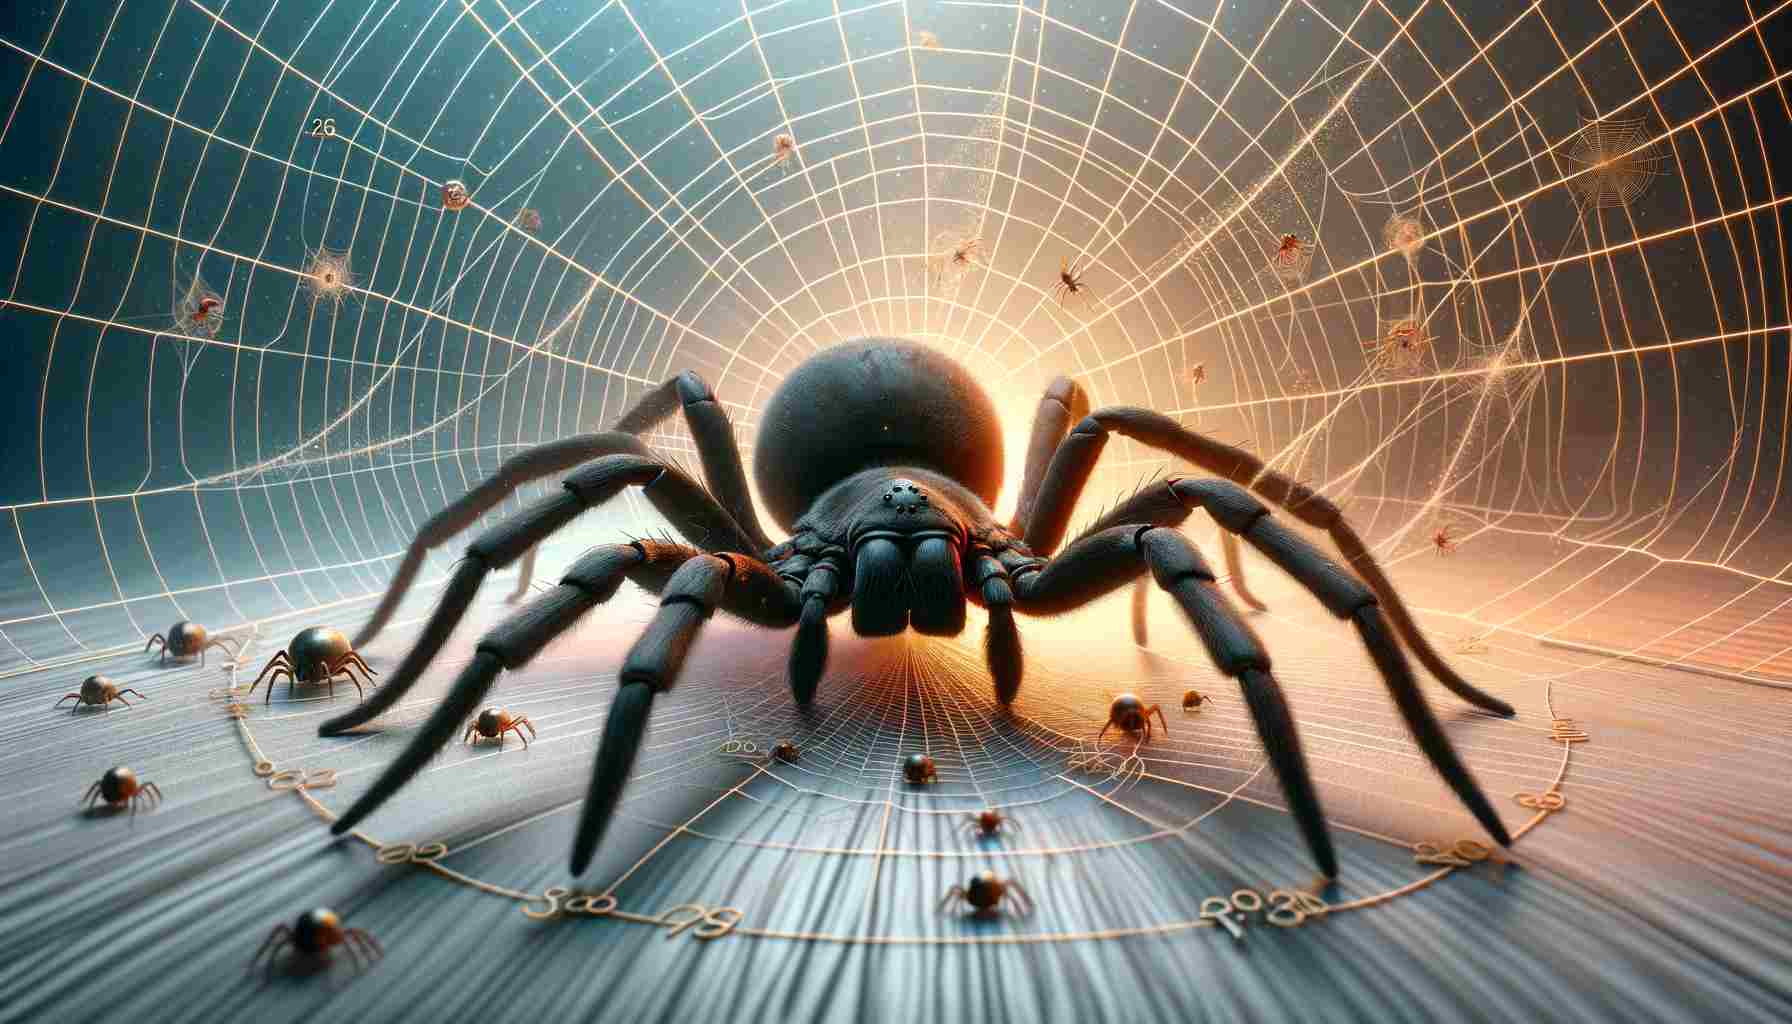 Lifespan of Black House Spiders